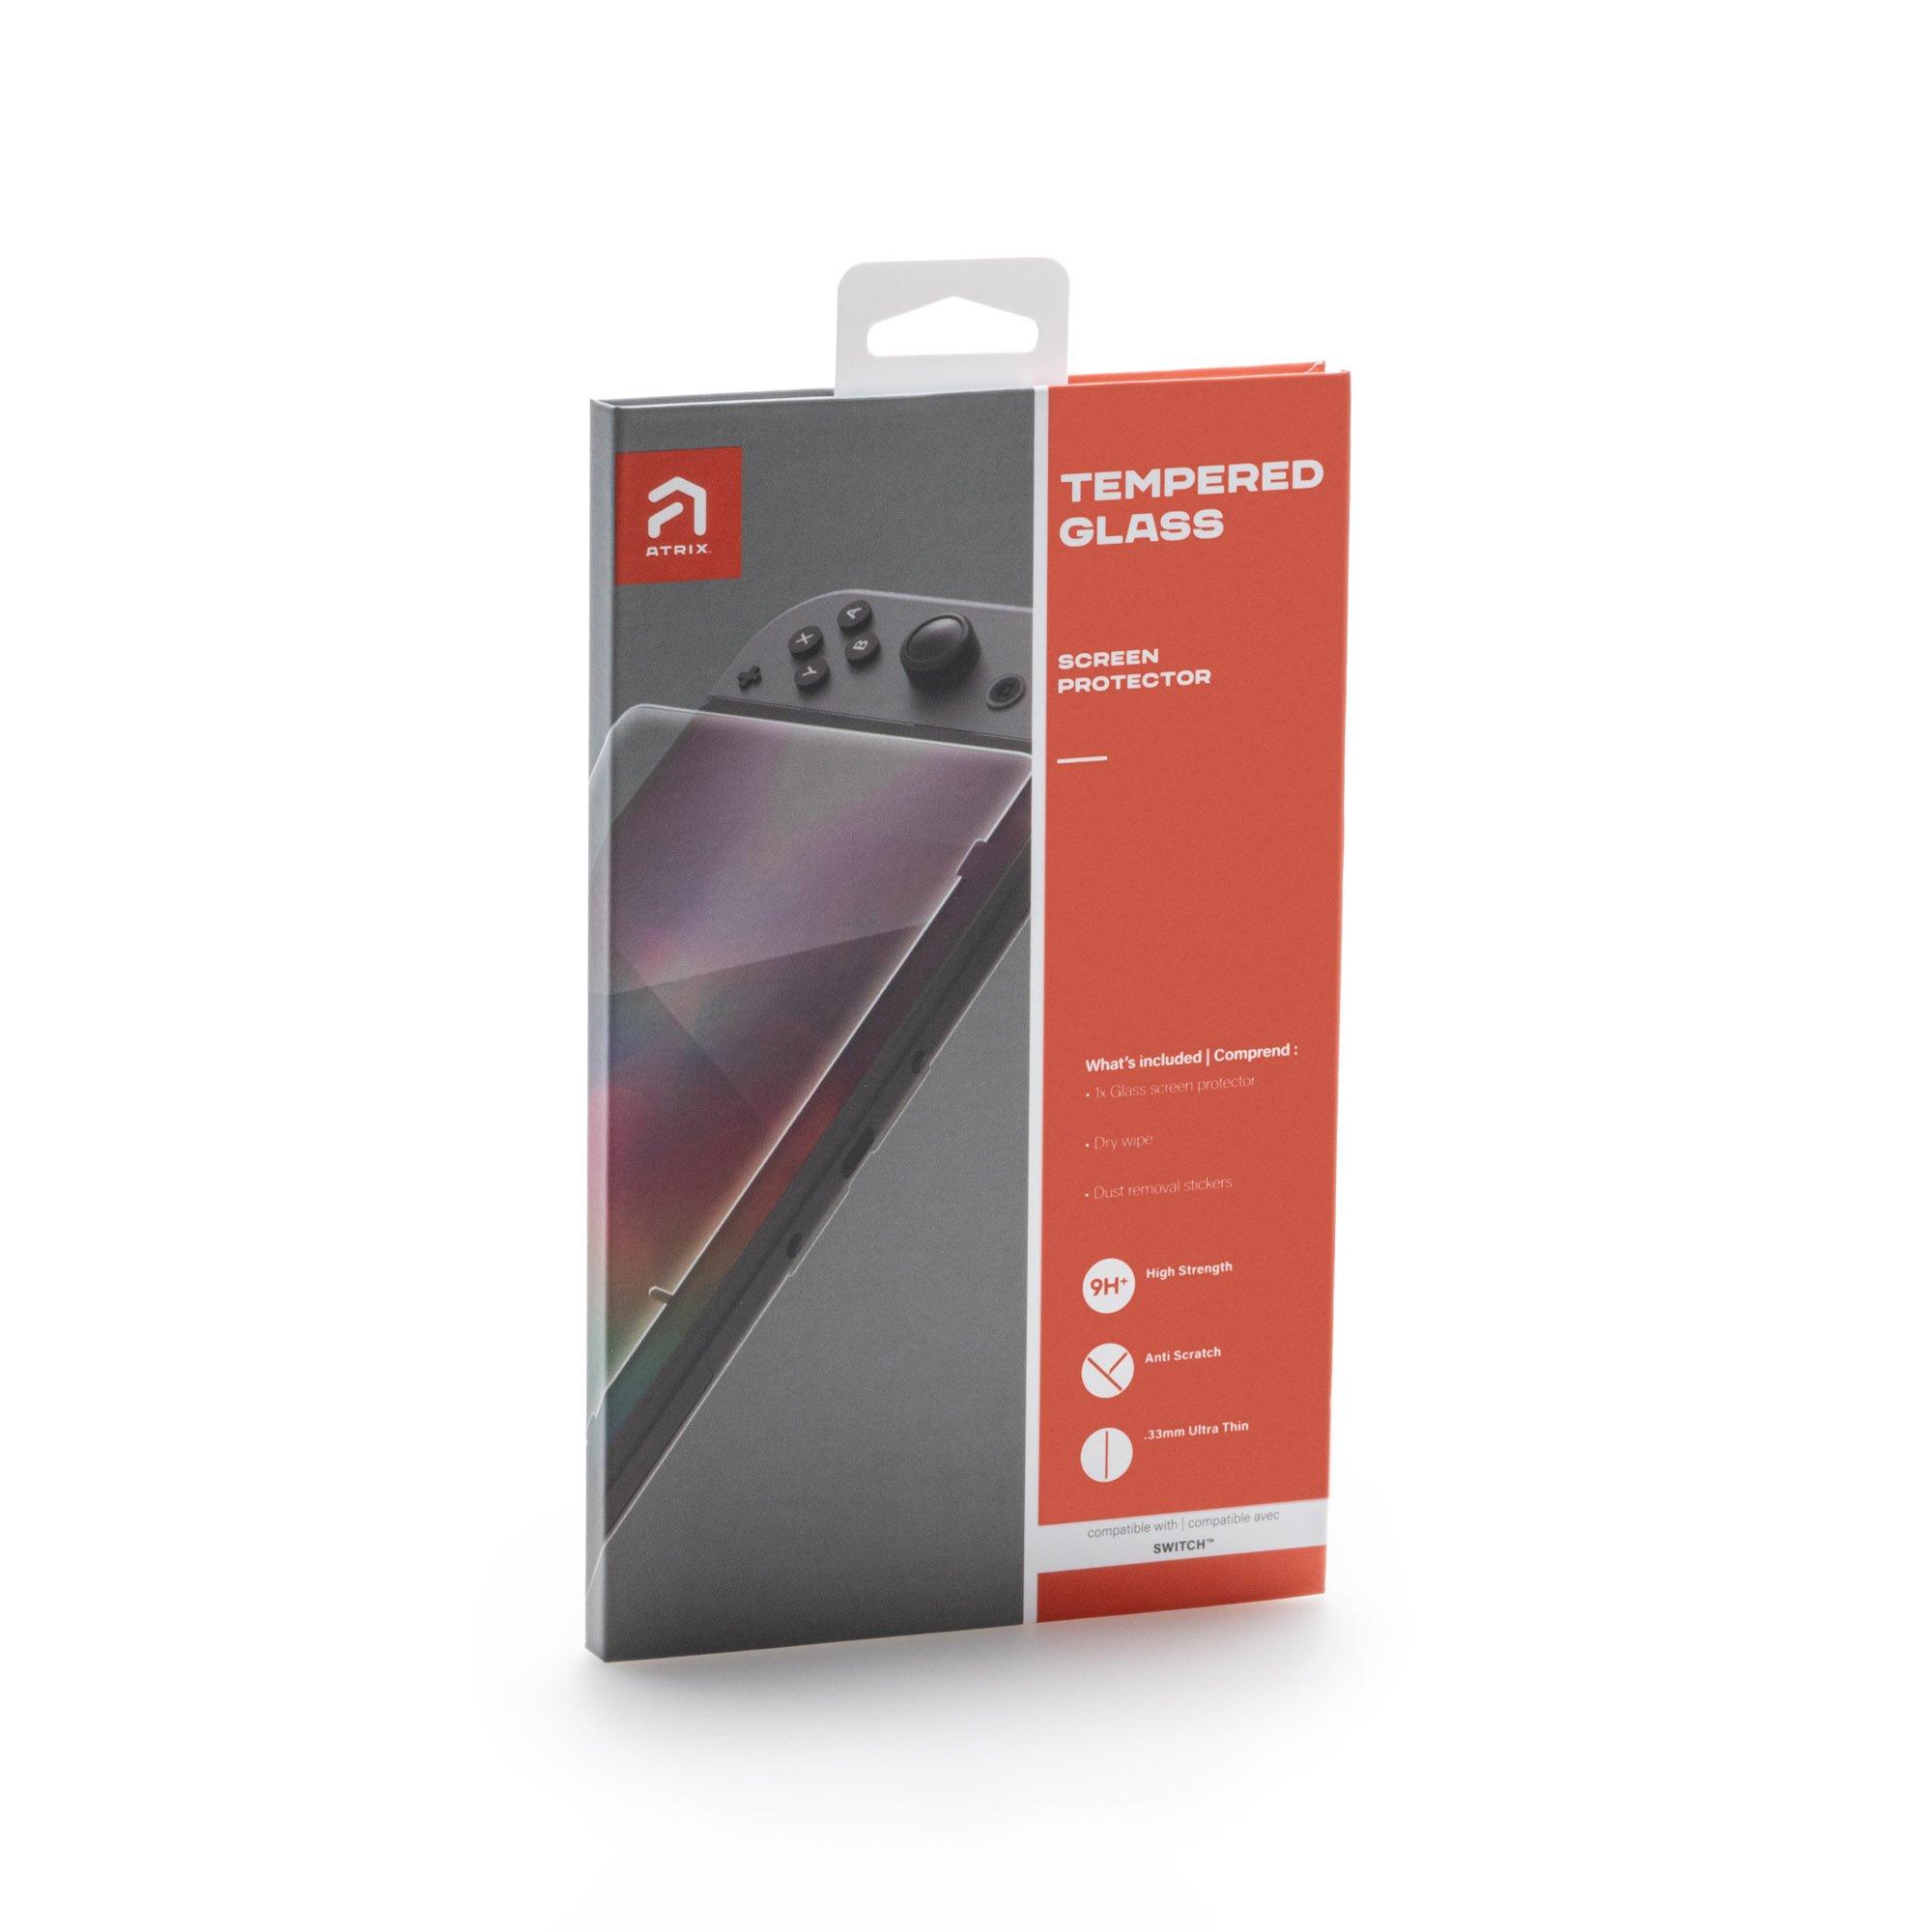 GameStop Tempered Glass for Nintendo Switch OLED